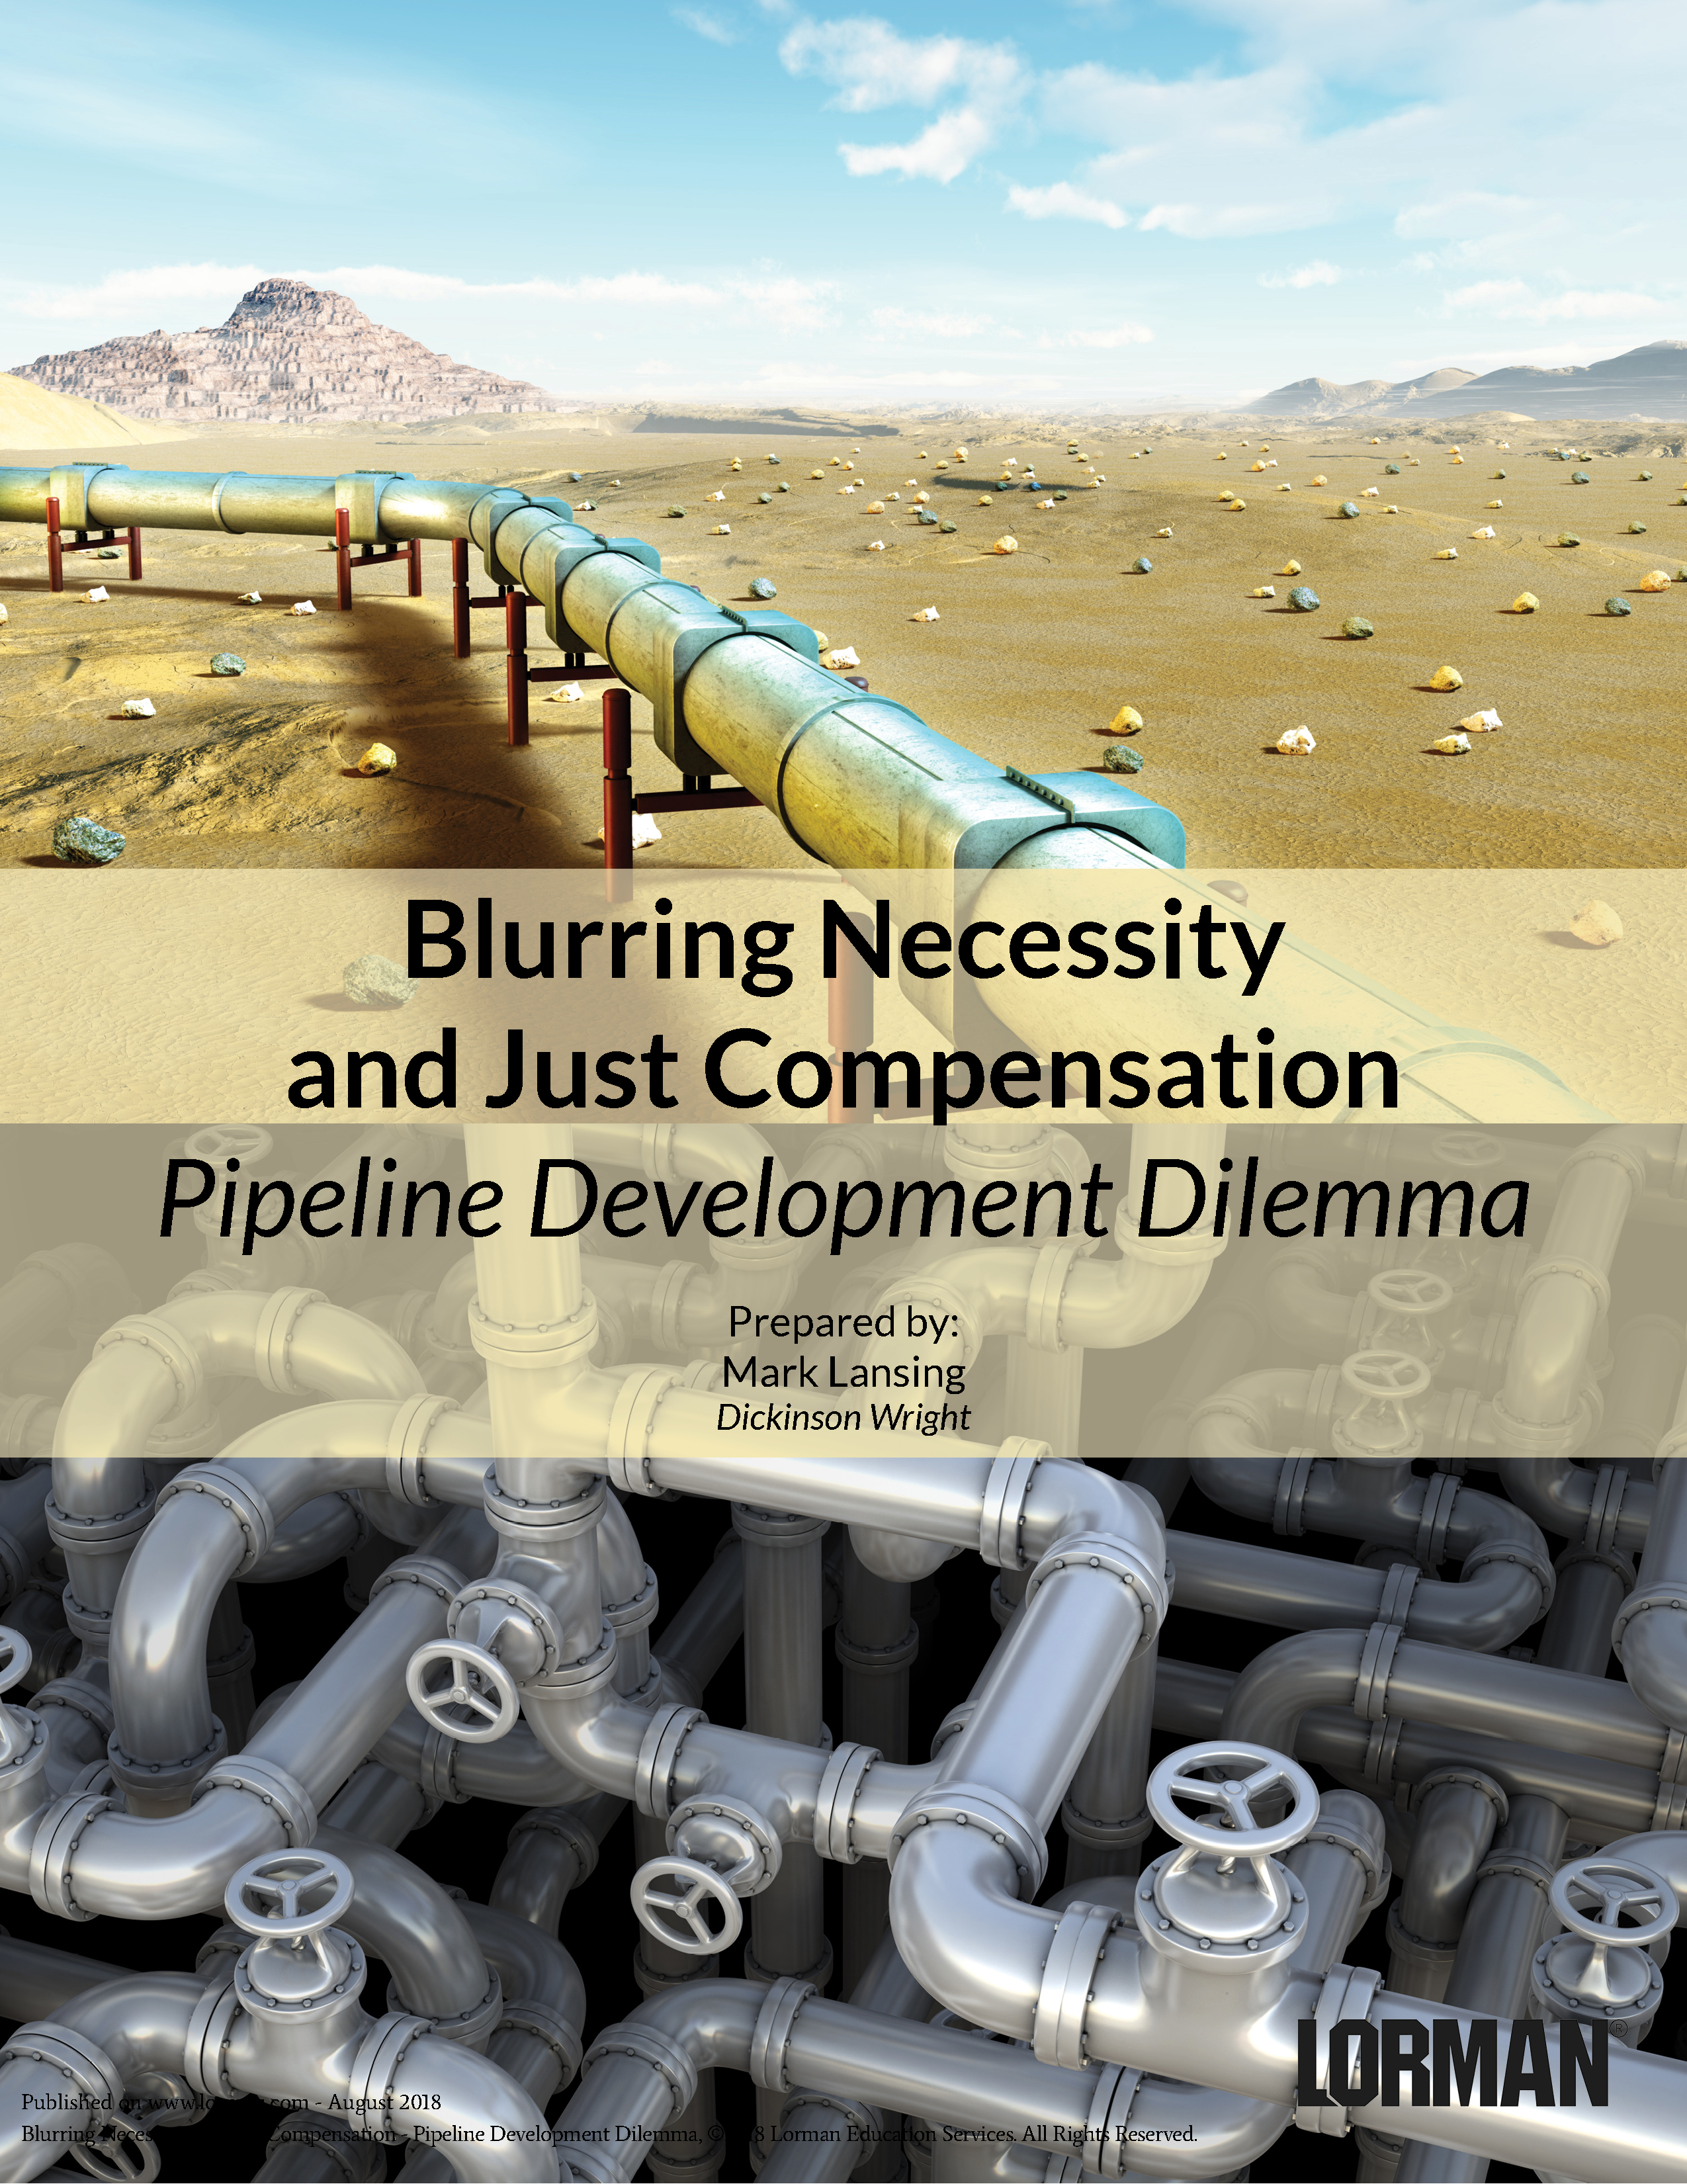 Blurring Necessity and Just Compensation - Pipeline Development Dilemma